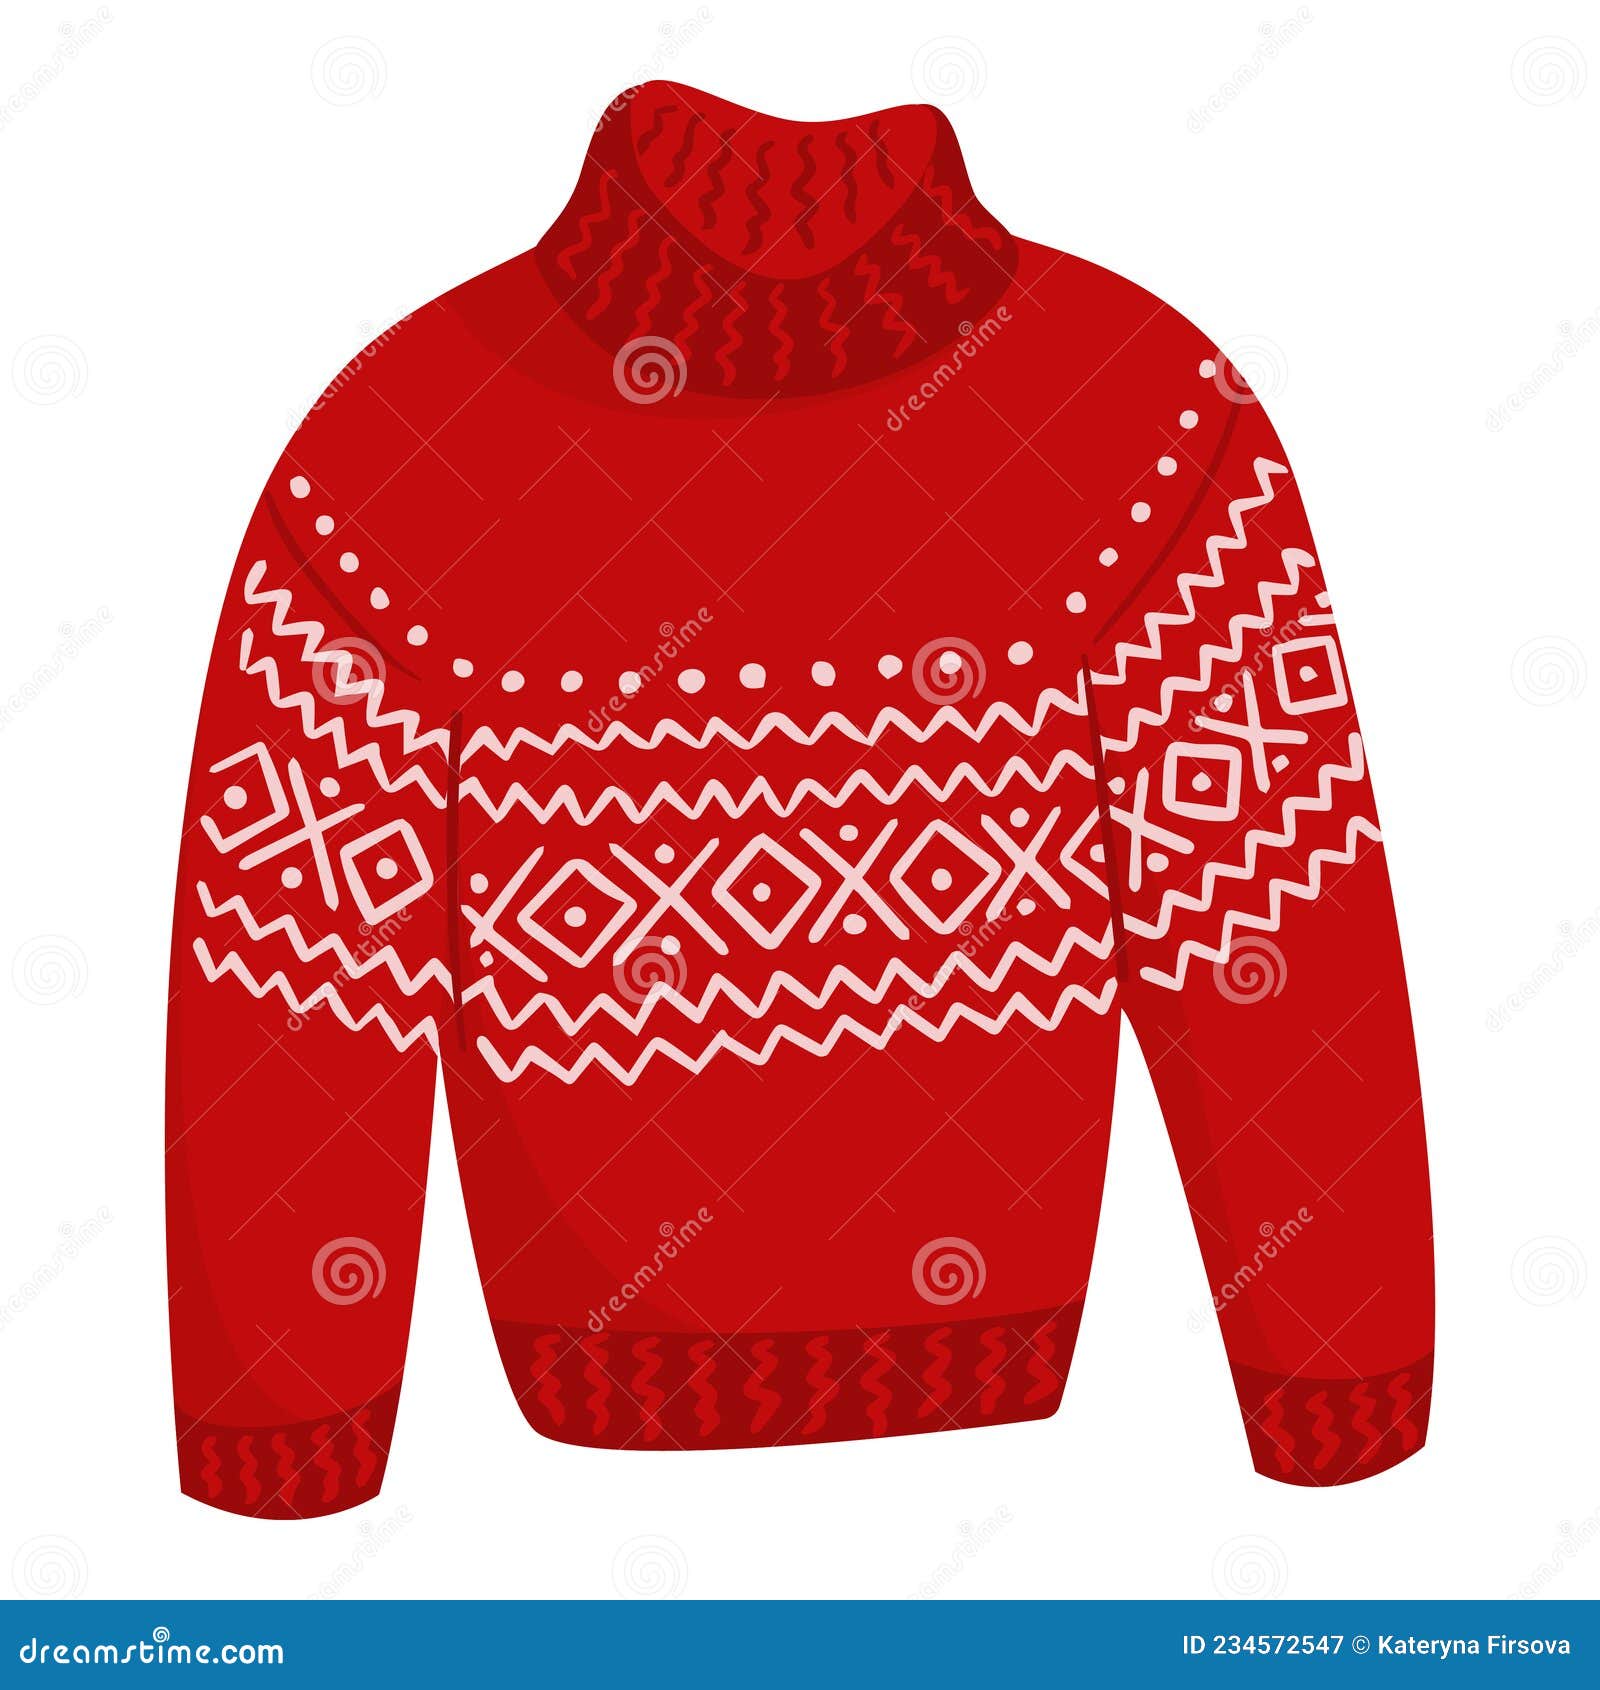 Flat Vector Cartoon Illustration of a Cozy Warm Red Sweater with a New Year  S Pattern. Christmas Knitted Warm Clothes on Stock Vector - Illustration of  winter, clothes: 234572547